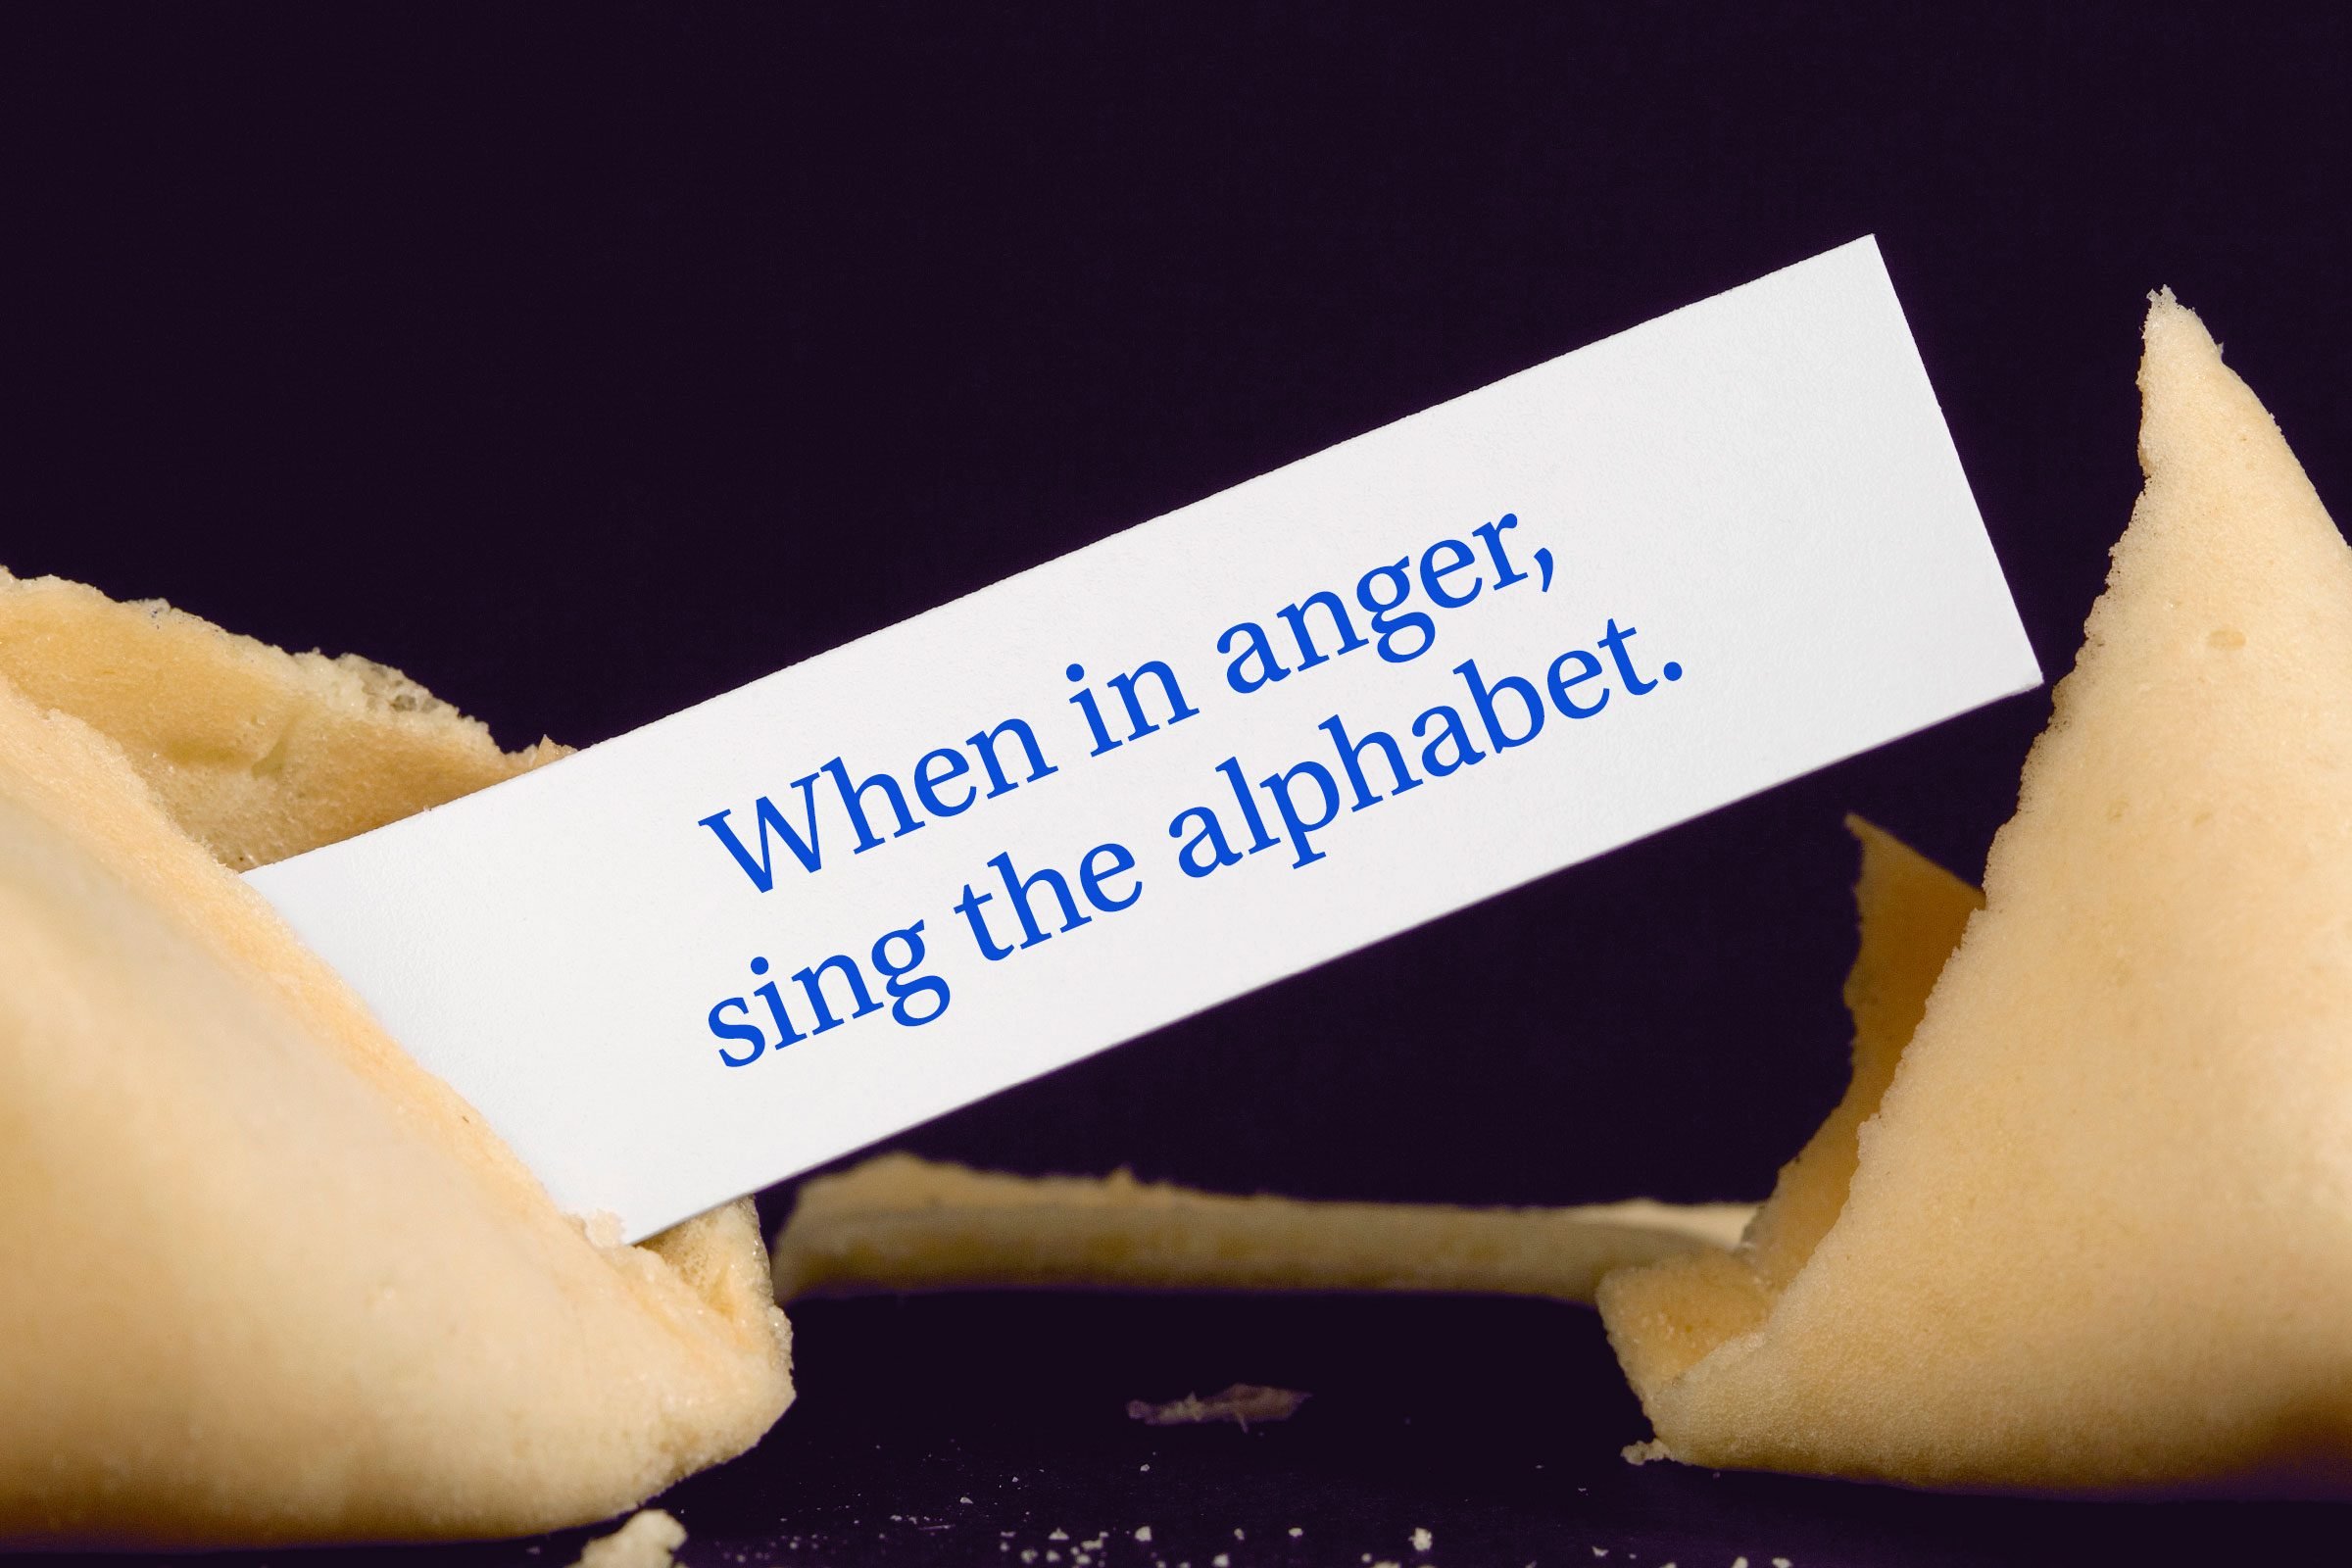 For image: When in anger, sing the alphabet.